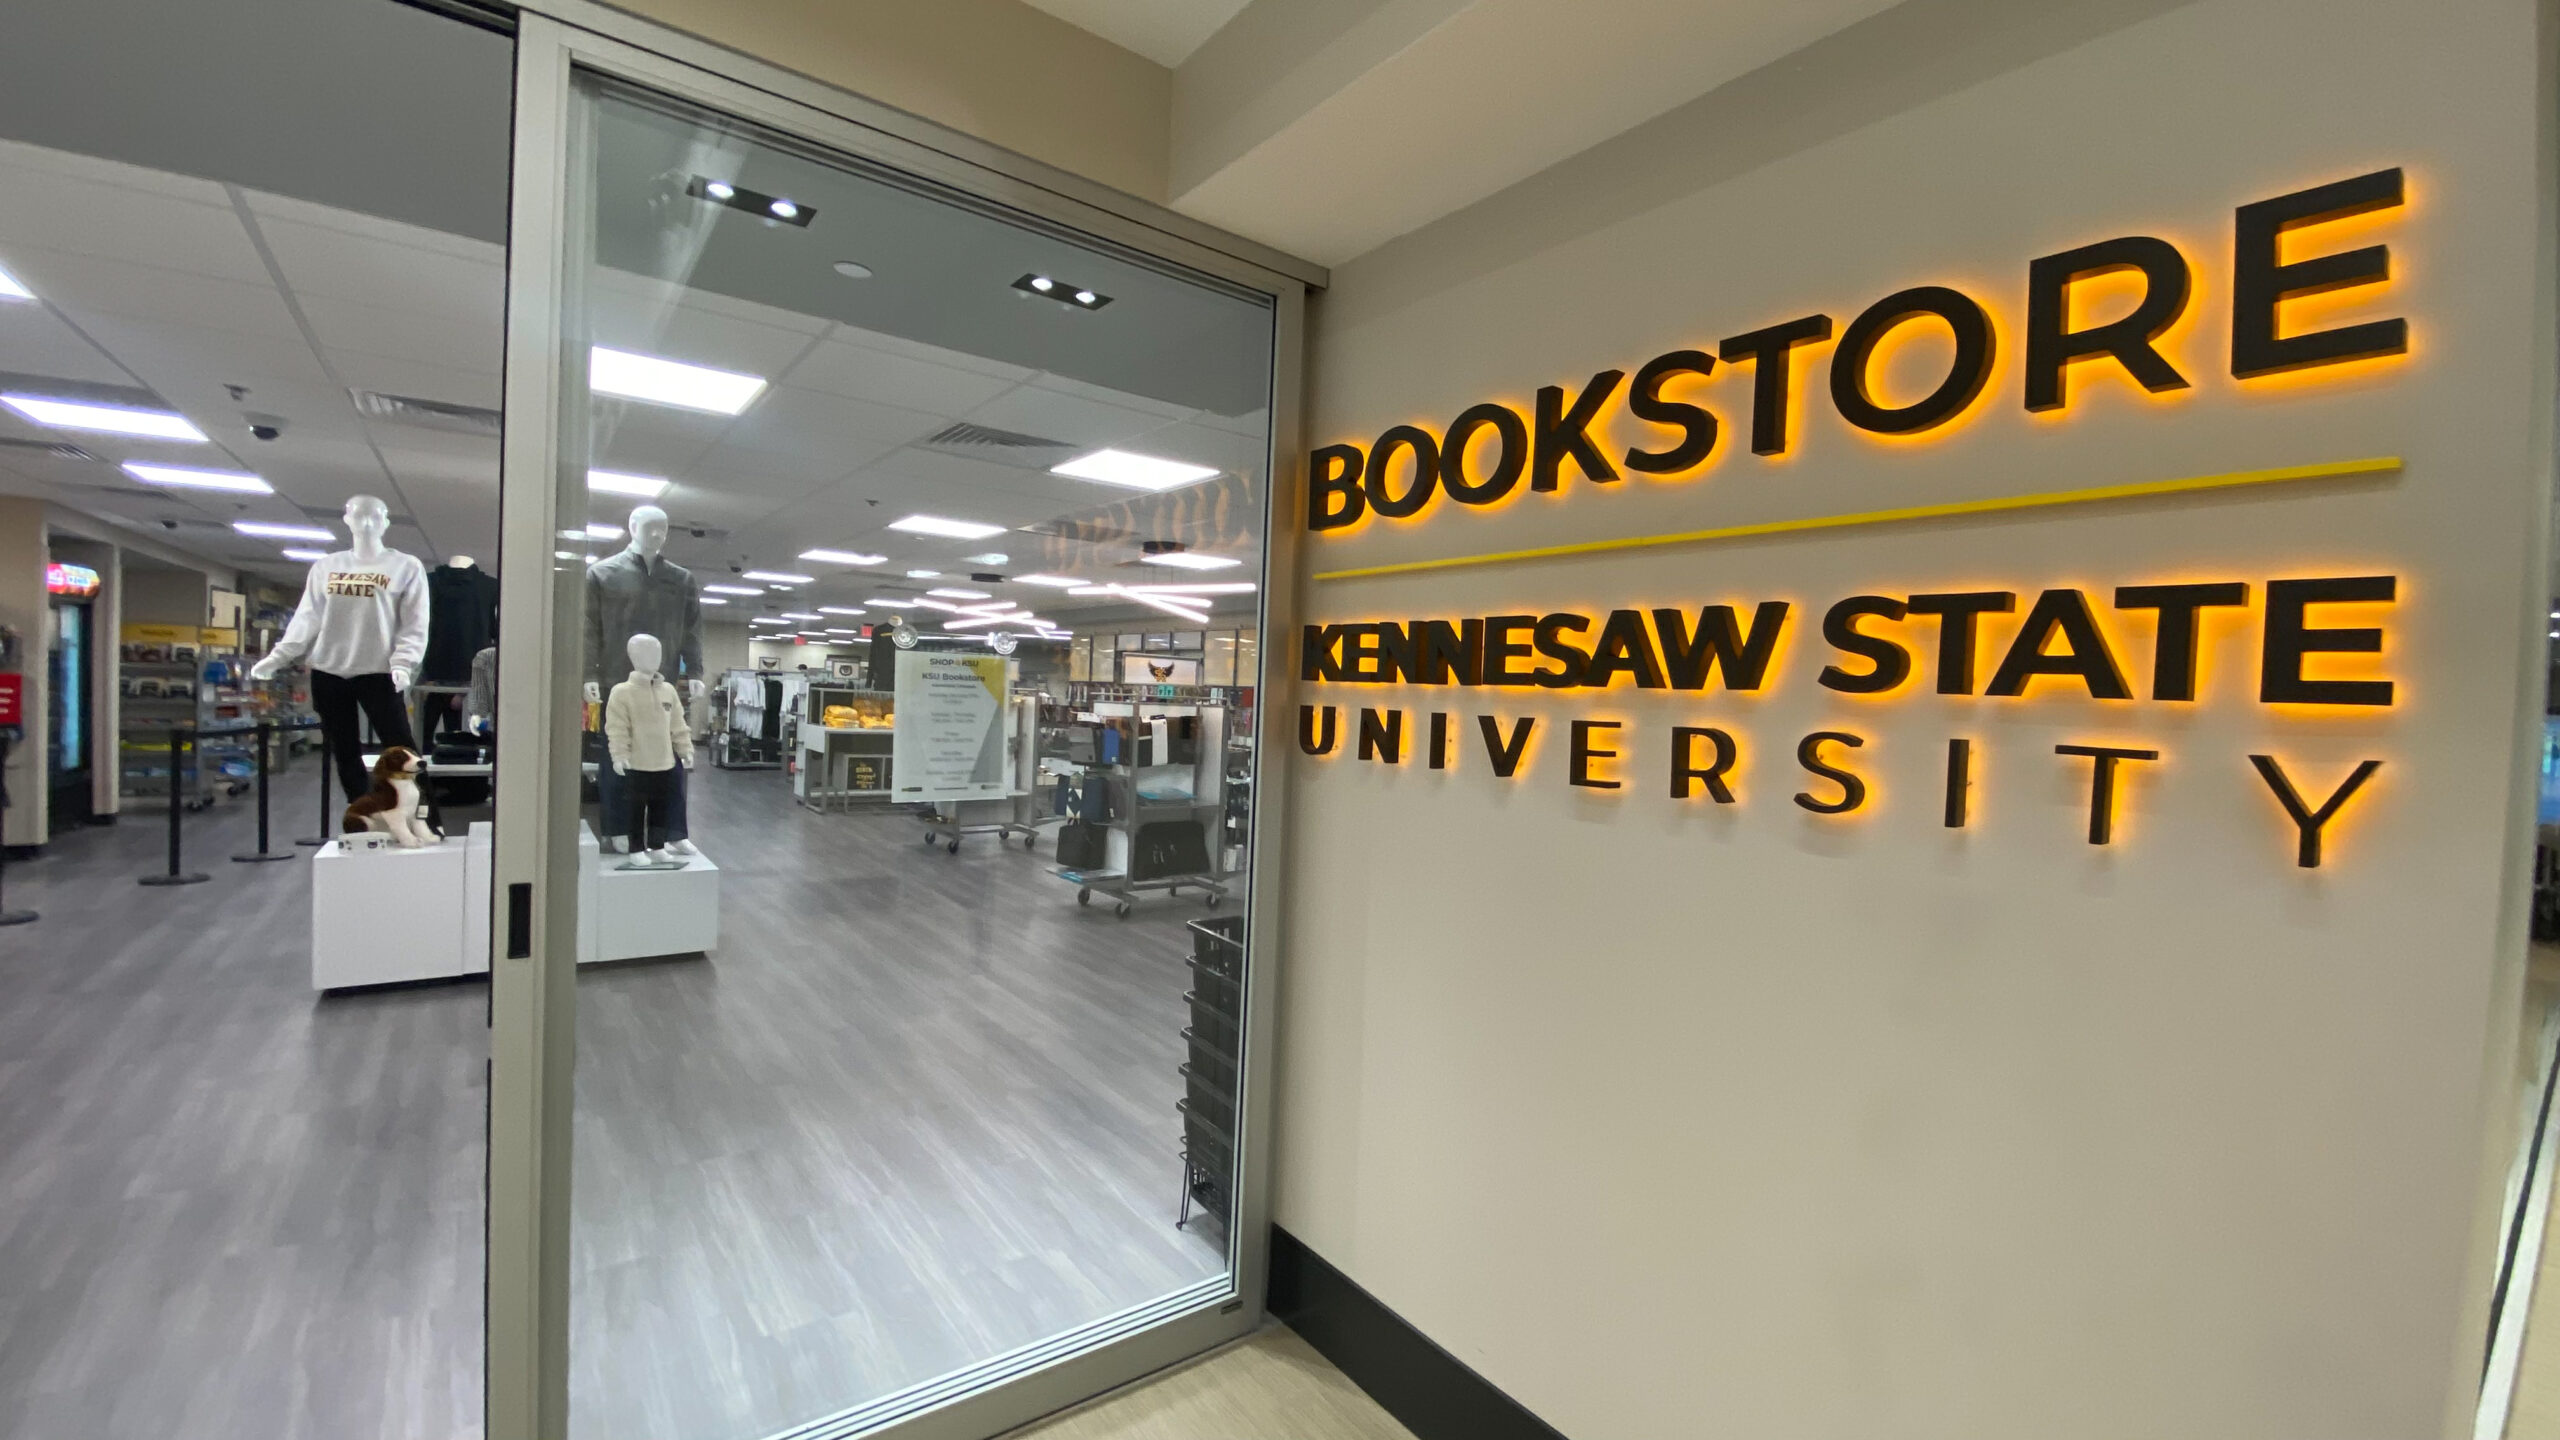 University Stores remodeled bookstore opens to students